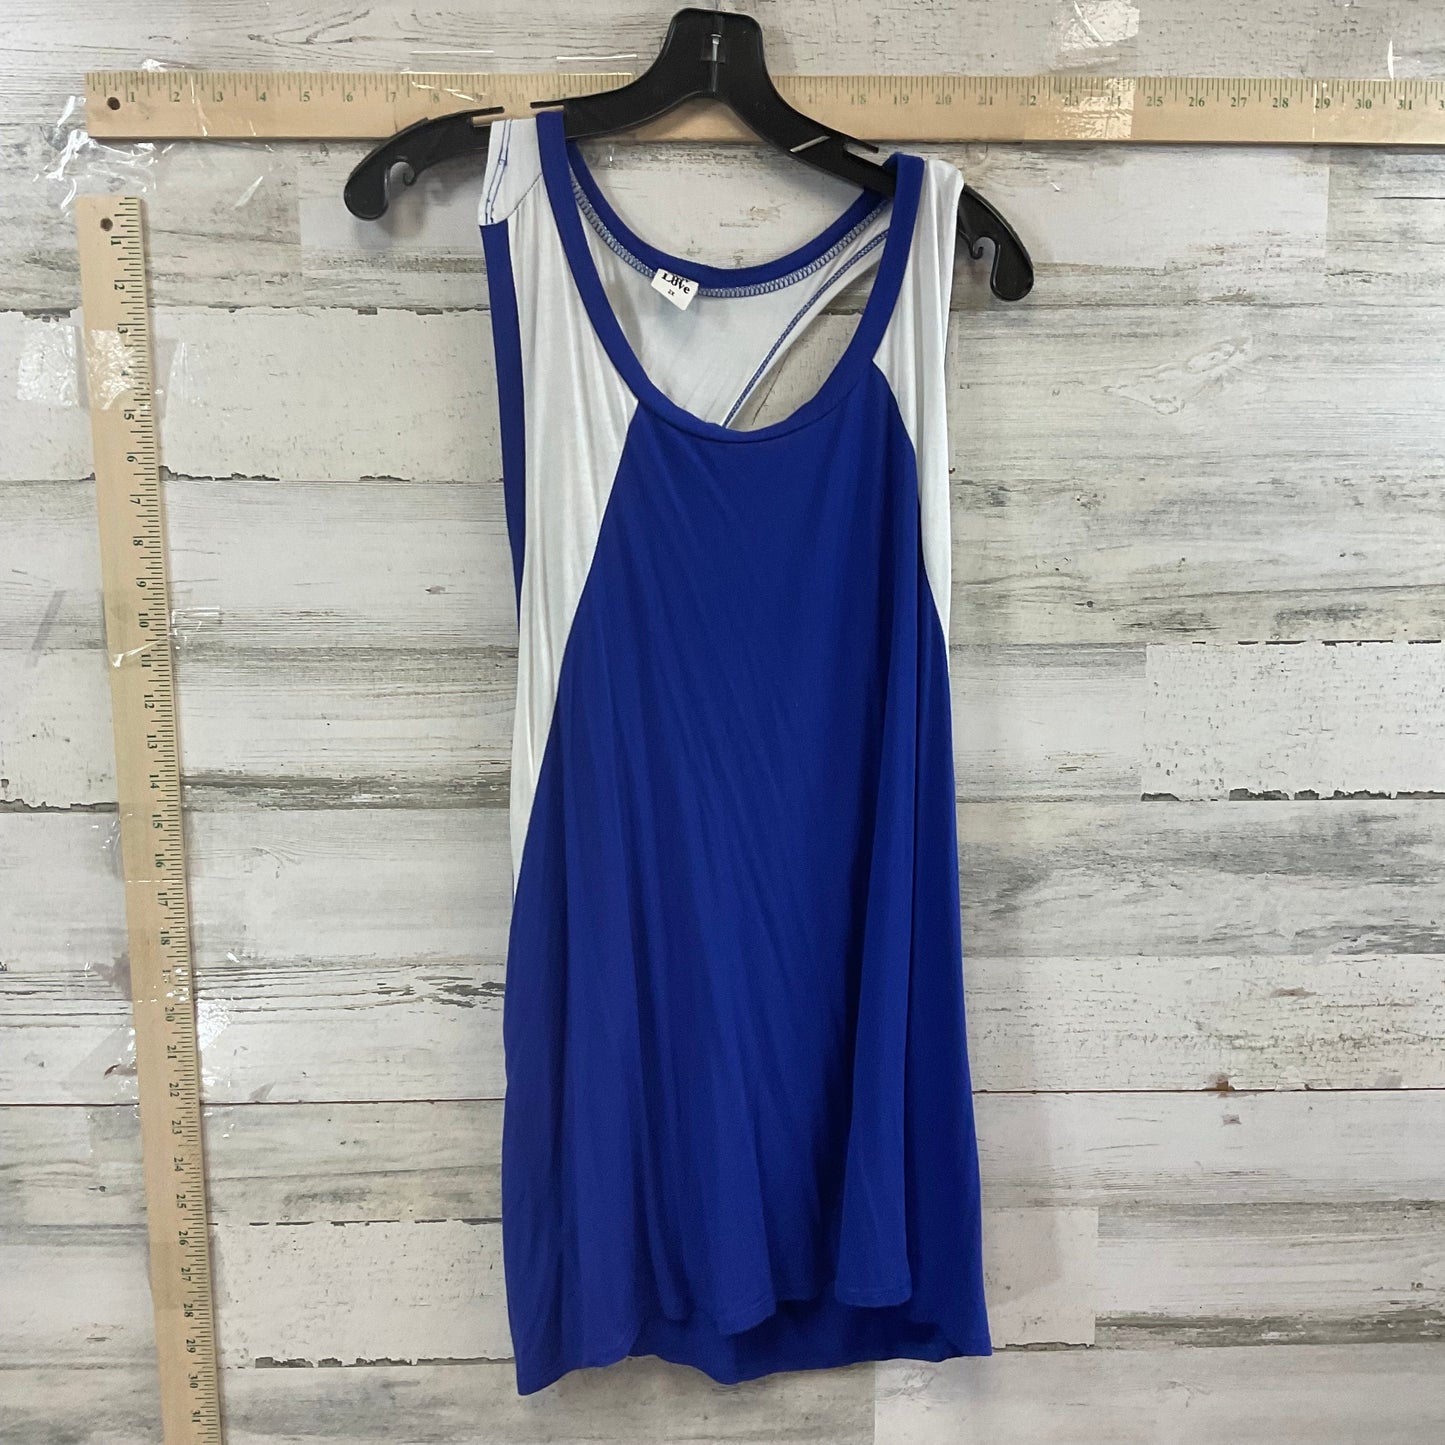 Blue & White Tank Top Sew In Love, Size 2x